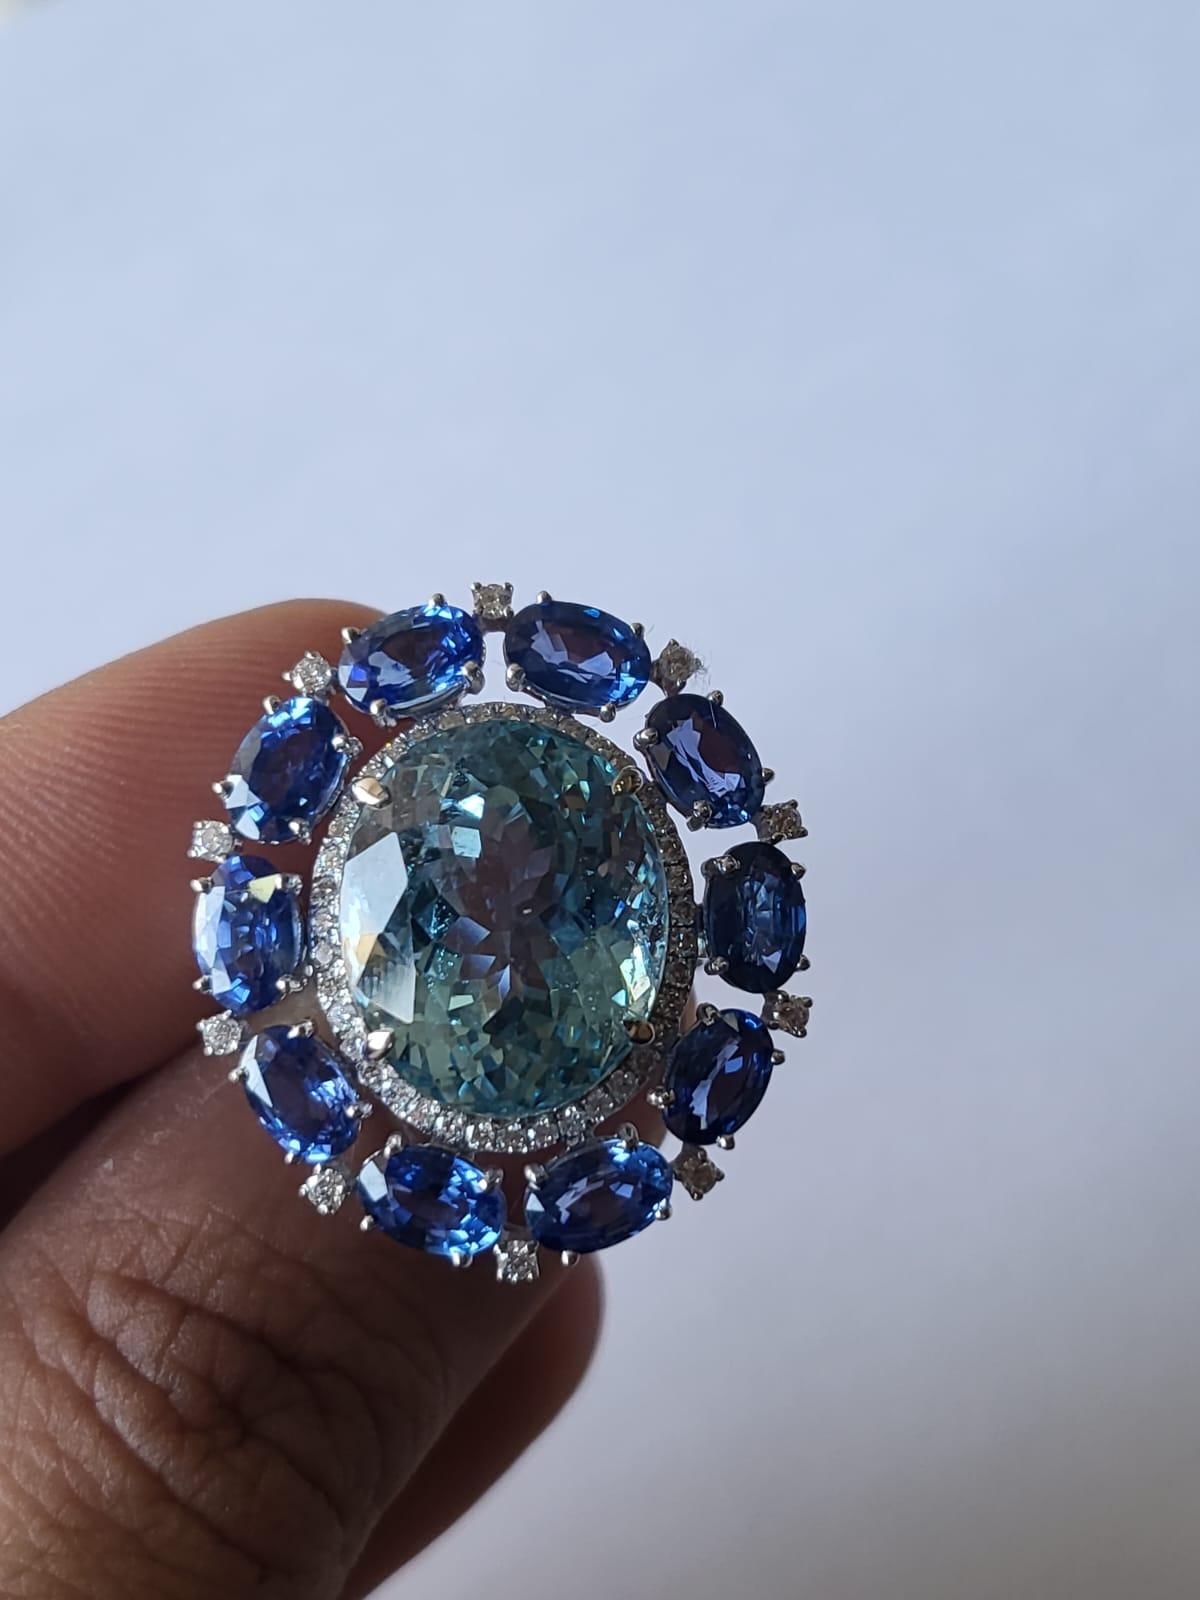 A very gorgeous and one of a kind, Aquamarine & Blue Sapphire Cocktail / Engagement Ring set in 18K White Gold & Diamonds. The weight of the round Aquamarine is 12.00 carats. The weight of the Blue Sapphire ovals is 5.95 carats. The Blue Sapphires